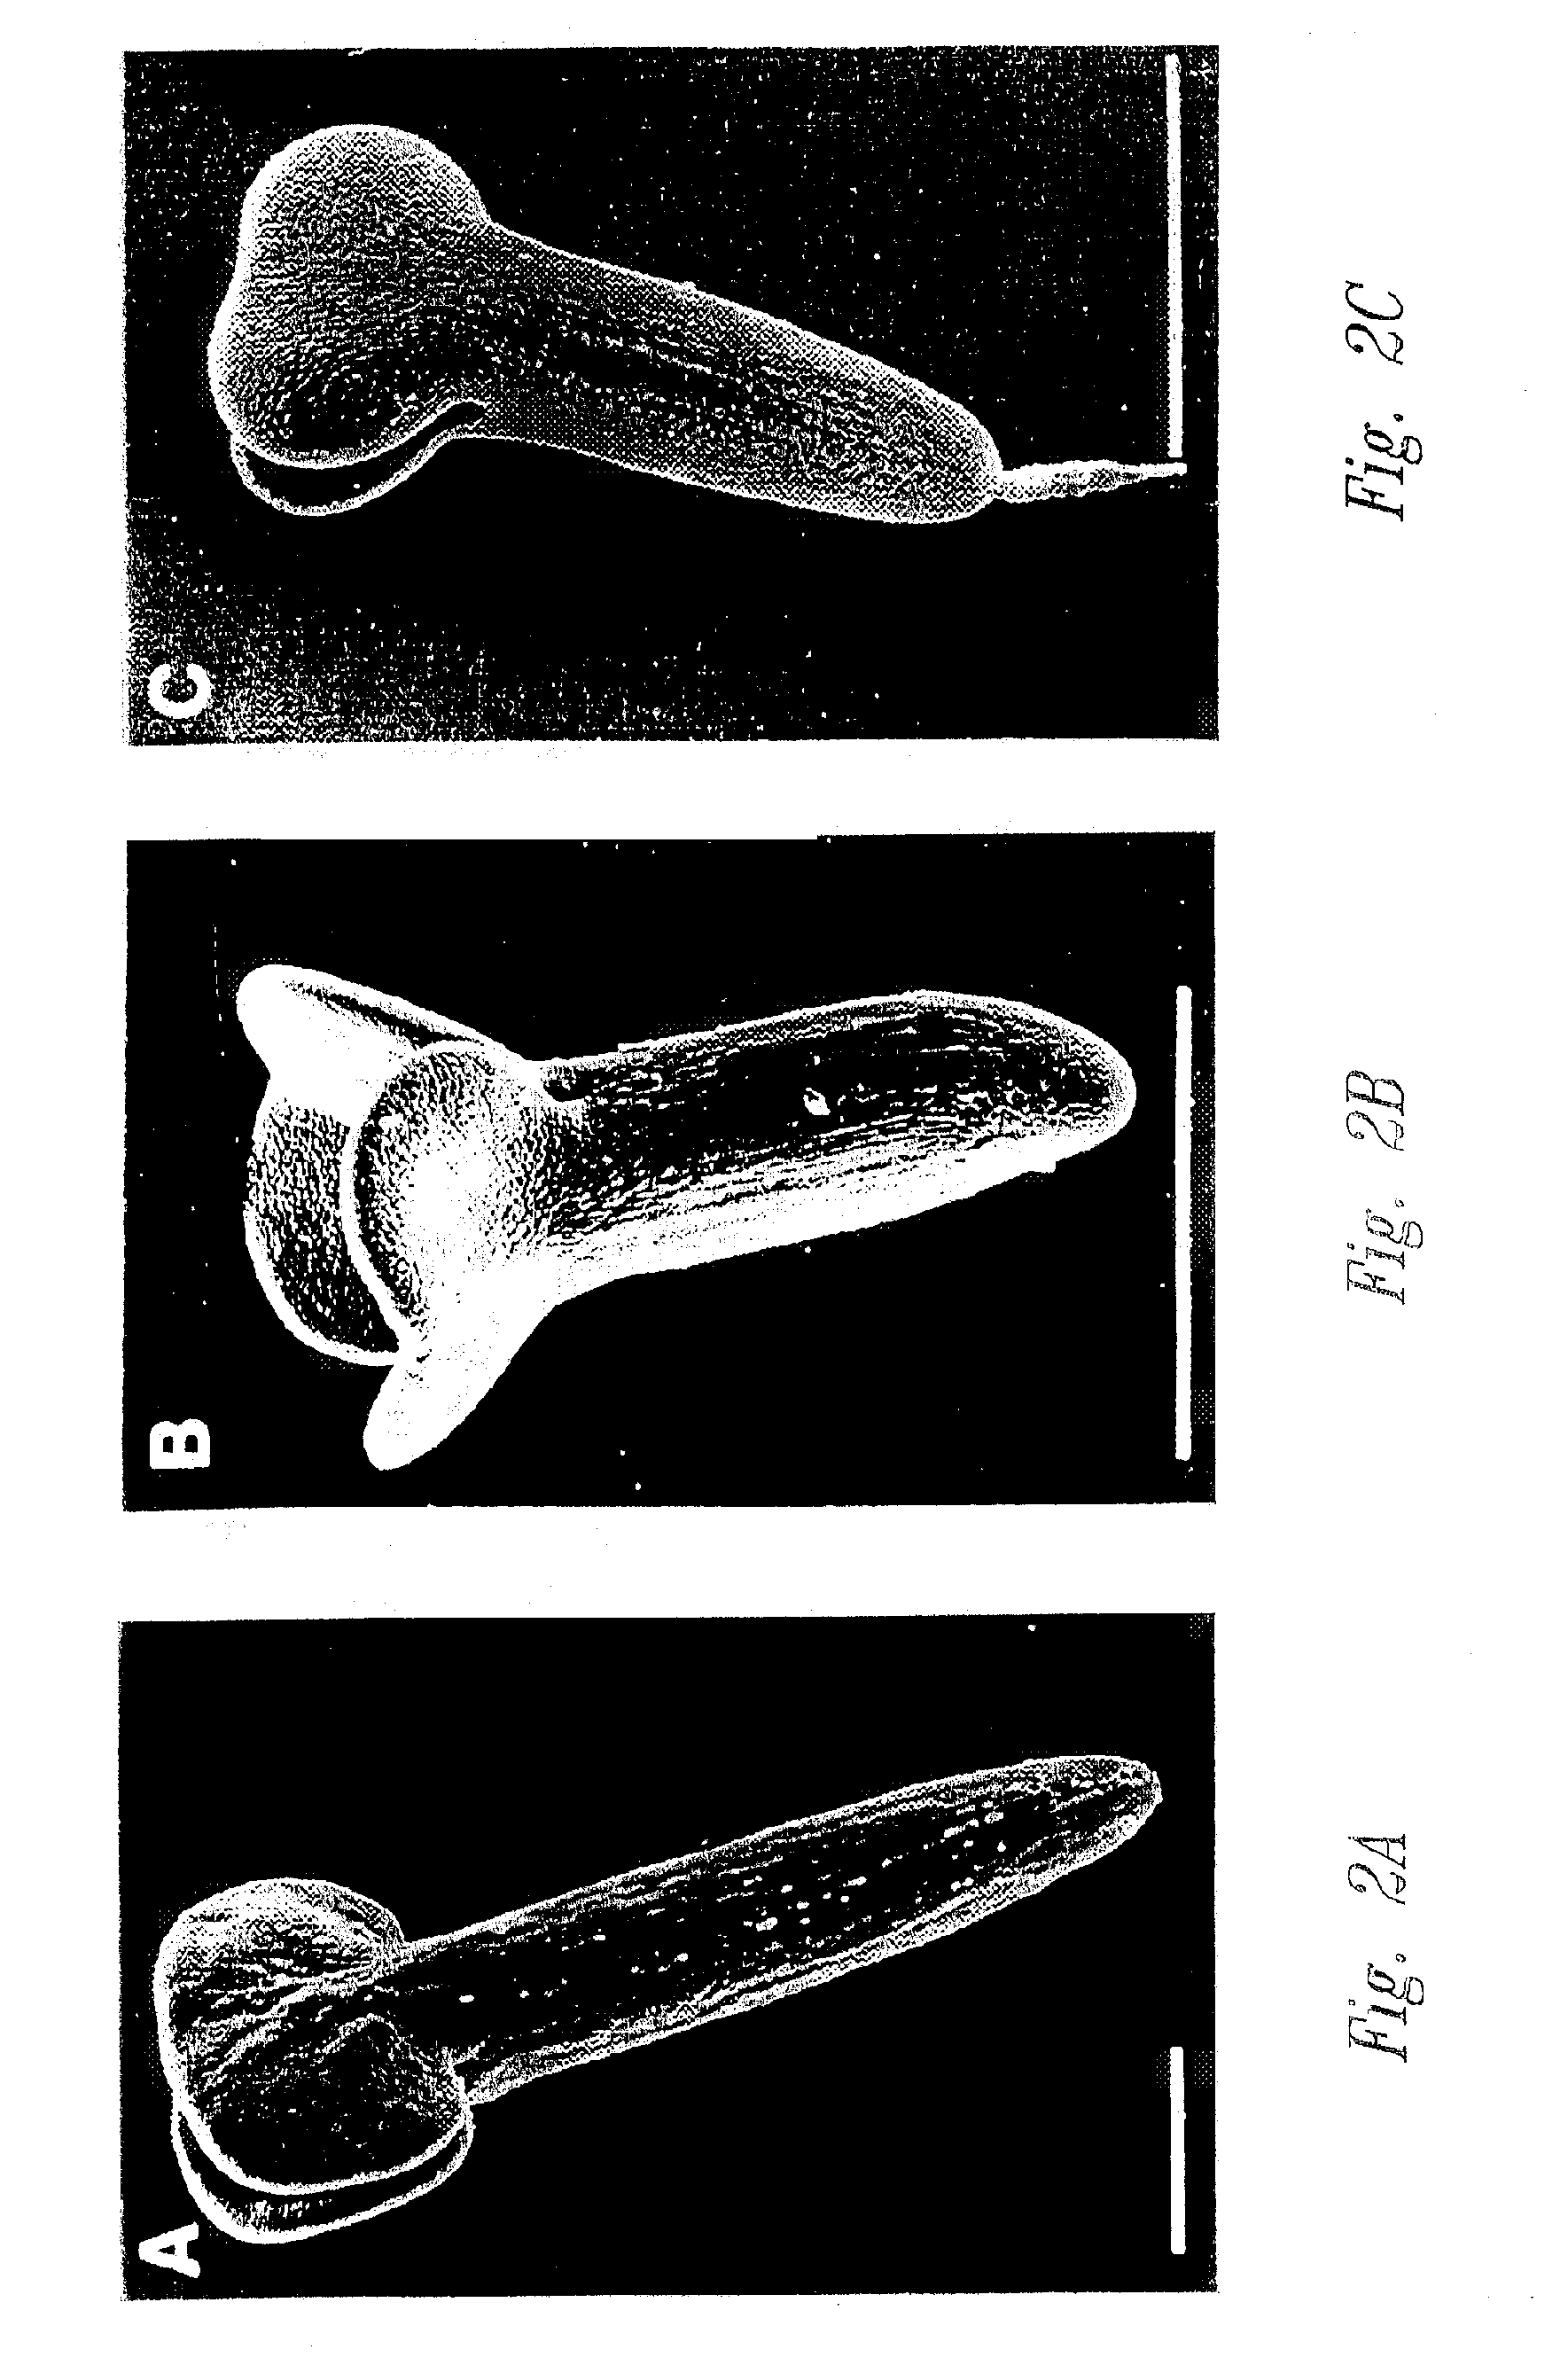 Media and methods for culturing plant embryos